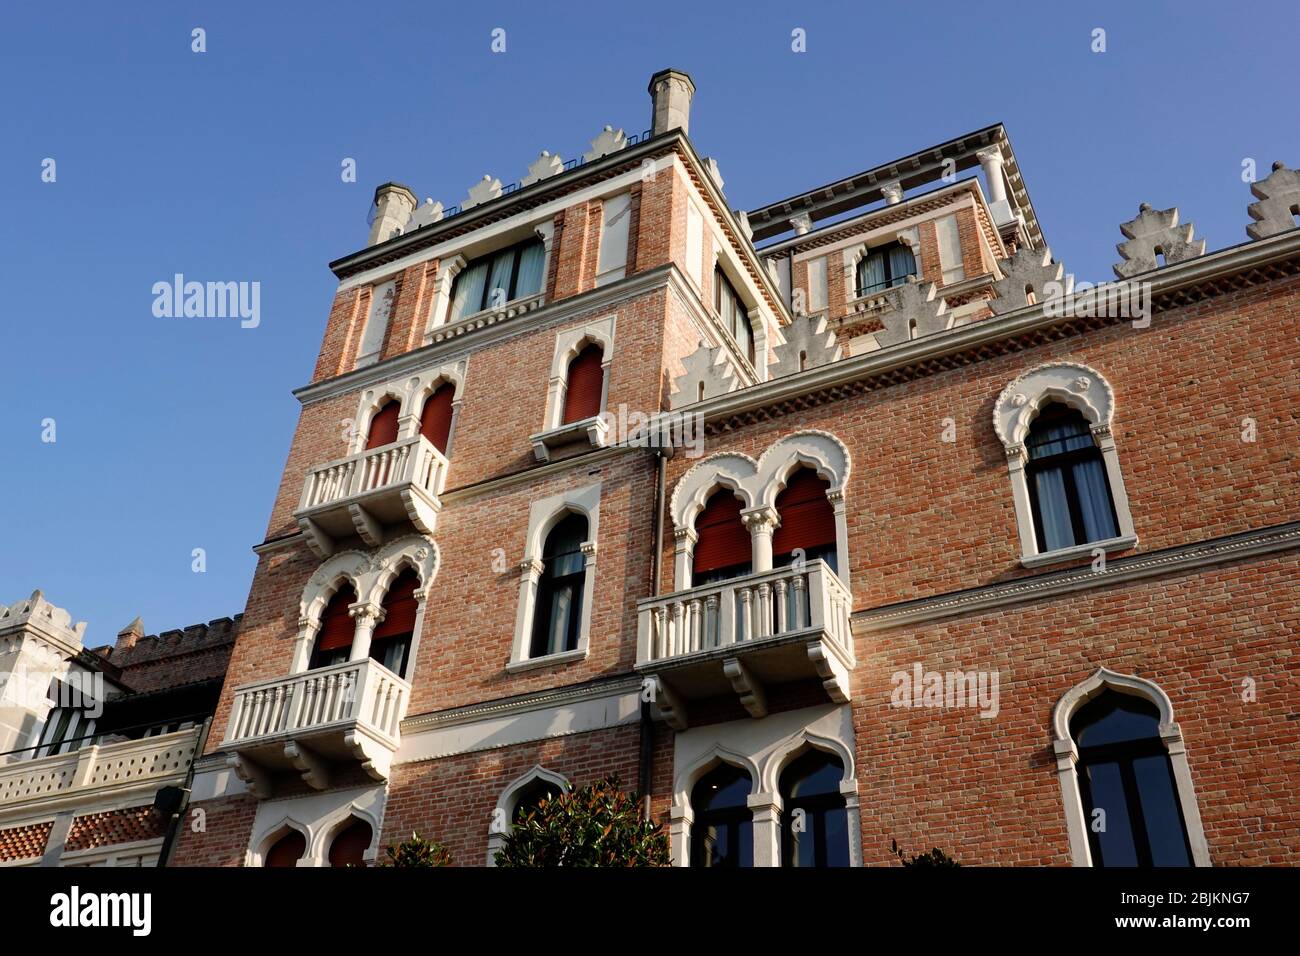 Hotel Excelsior on The Lido, Venice, Italy. Stock Photo